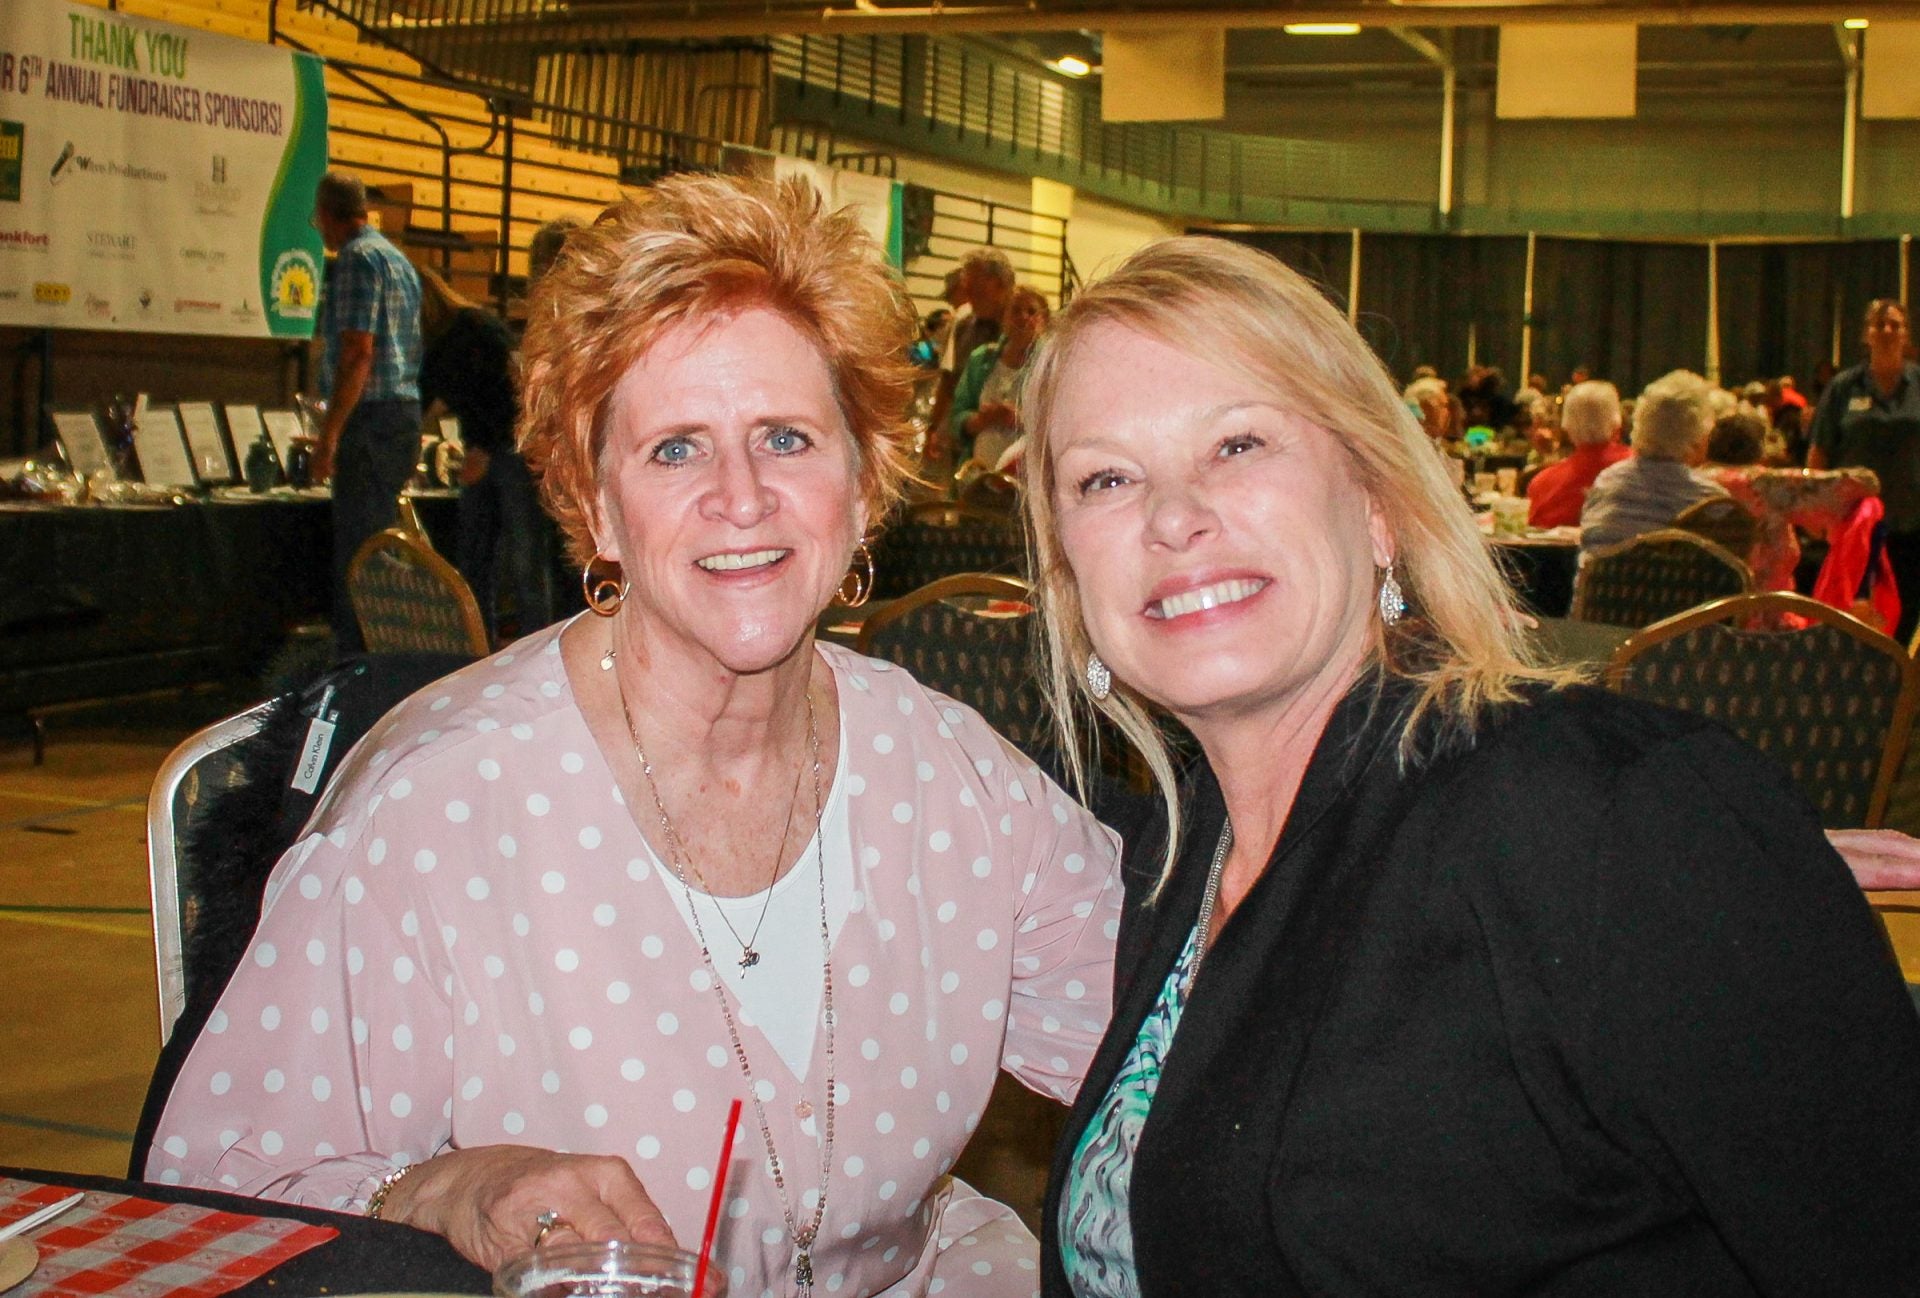 Snapped: Community Supporting Seniors, May 16, 2019